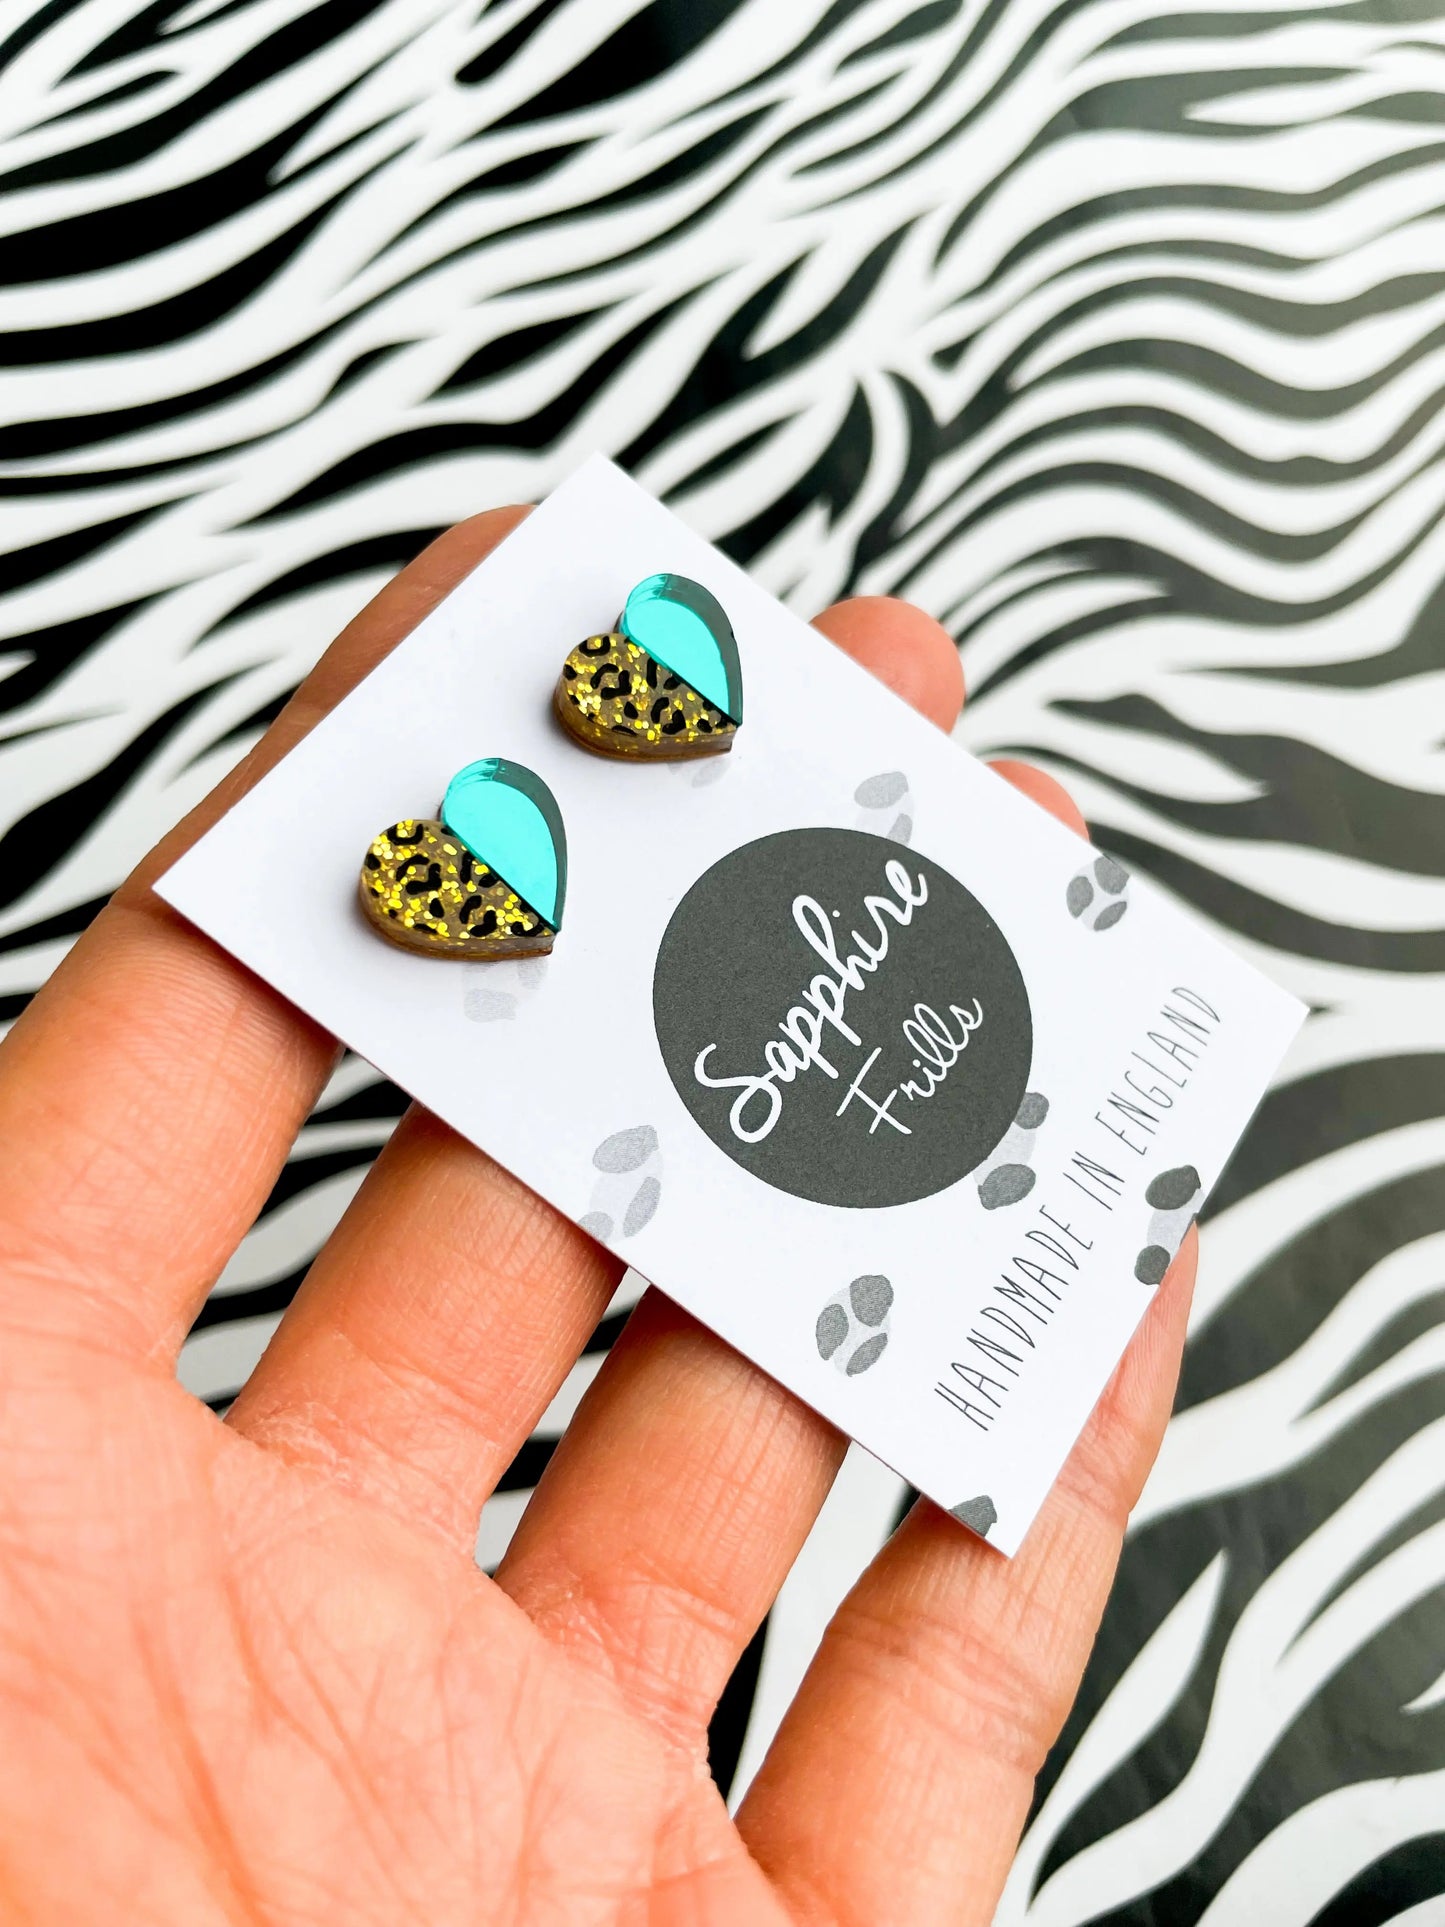 Small Teal Mirror and Gold Glitter Leopard Print Acrylic Heart Studs from Sapphire Frills